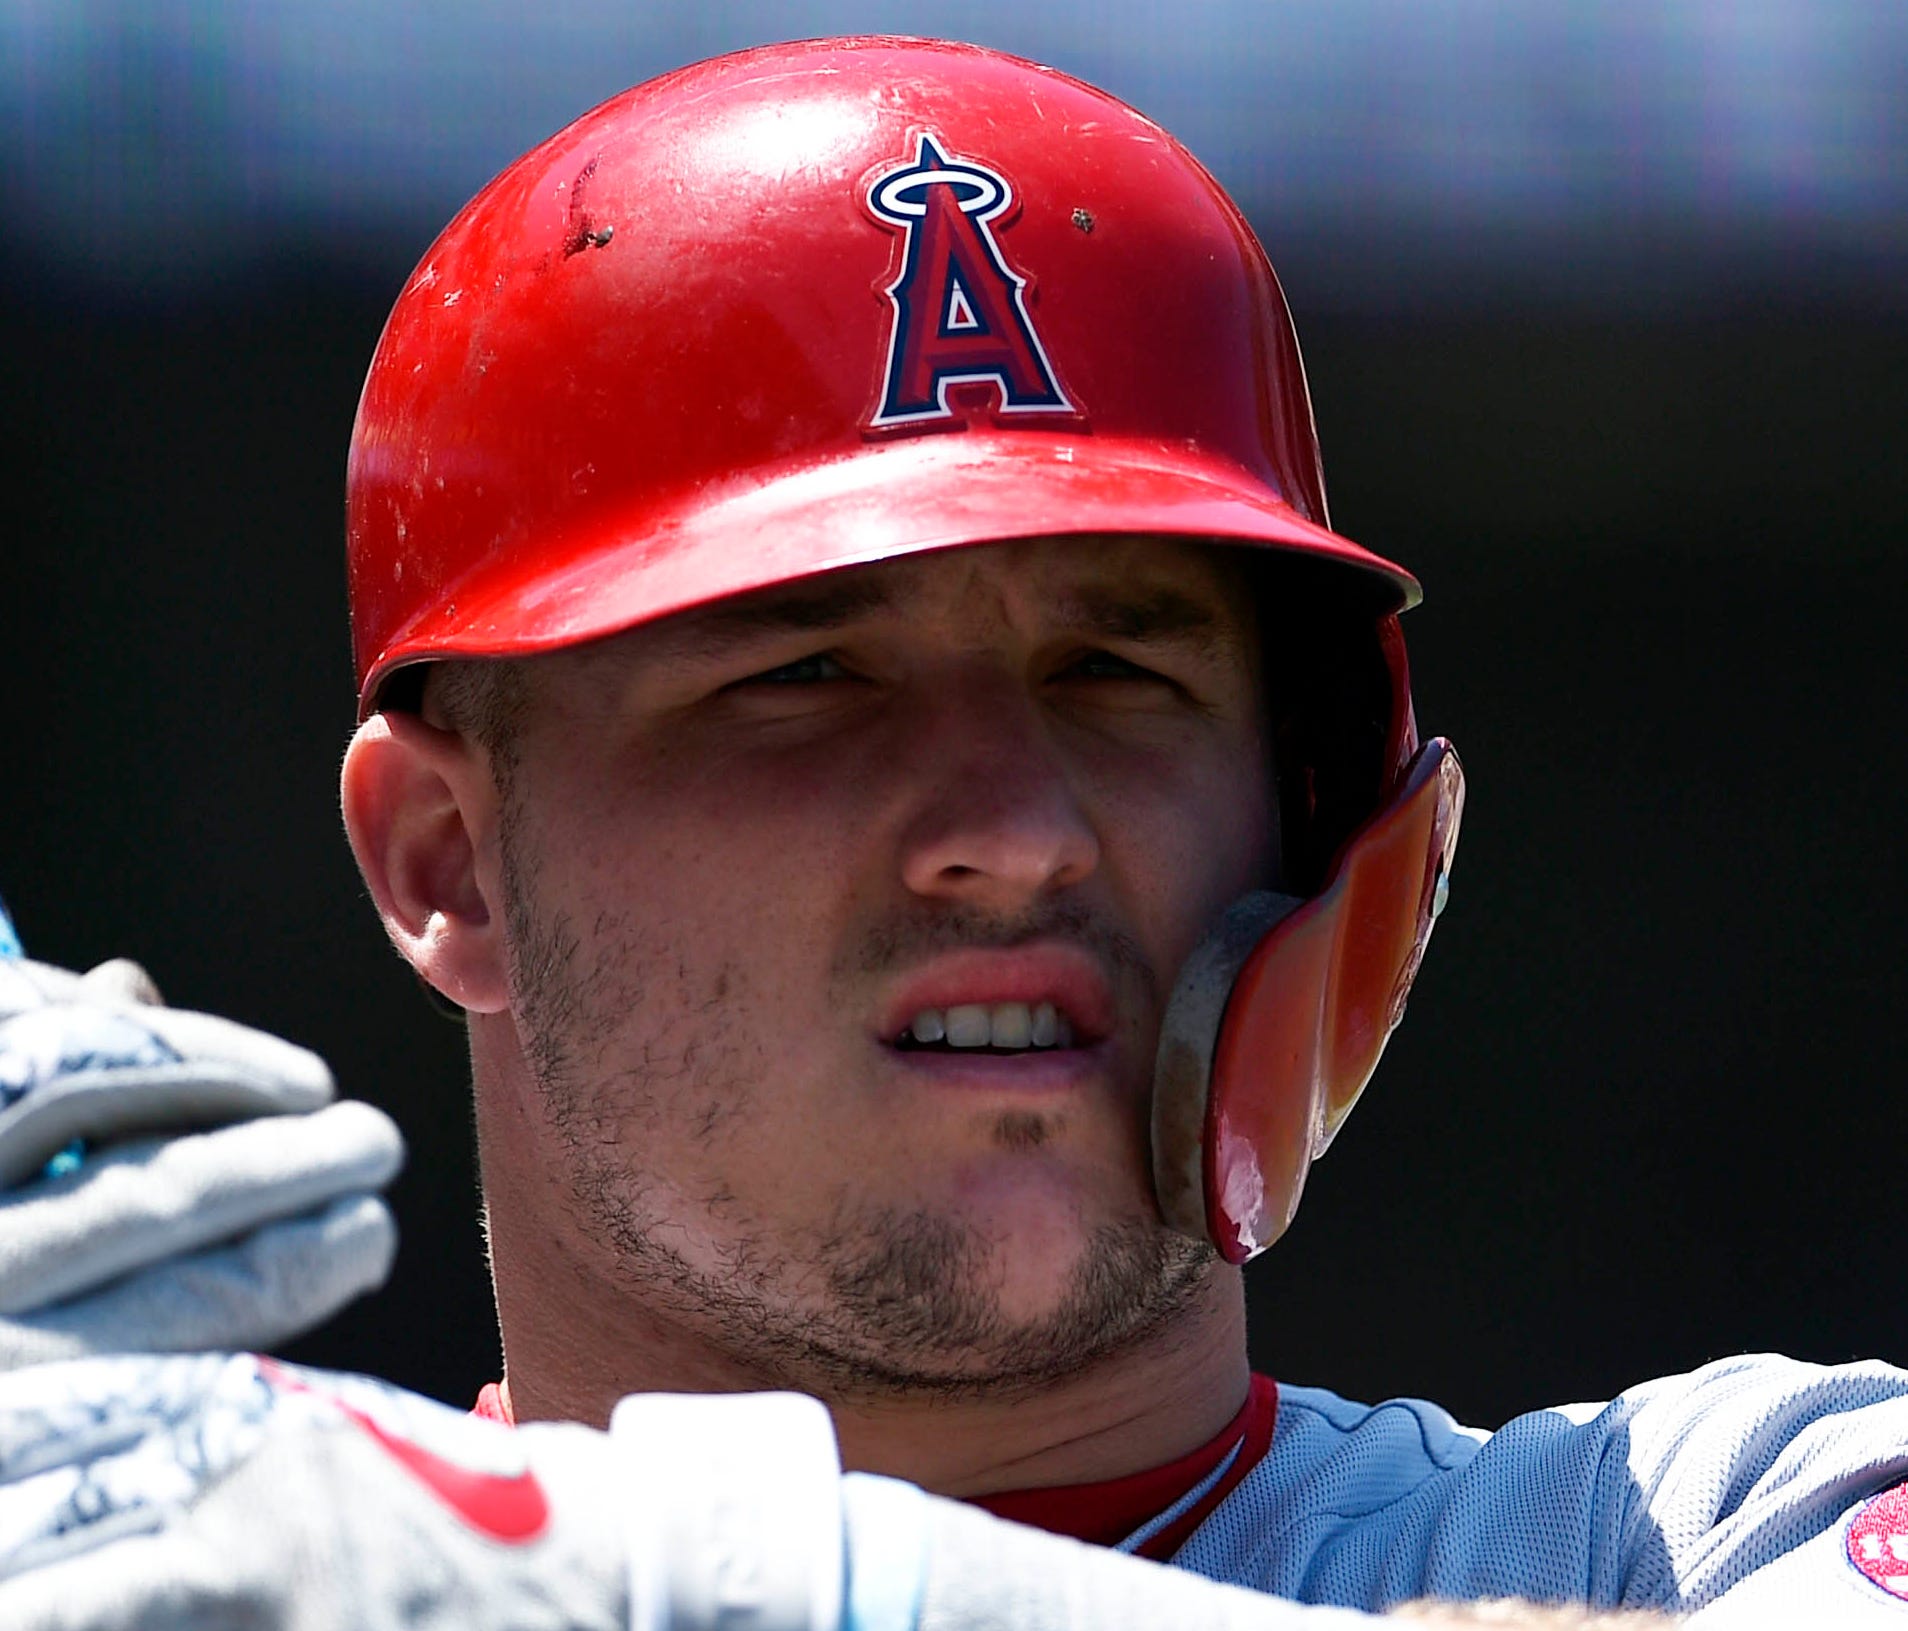 Mike Trout is among 10 players on the All-Star Game roster who wear the C-Flap to help protect their cheek and jaw from injury if struck.